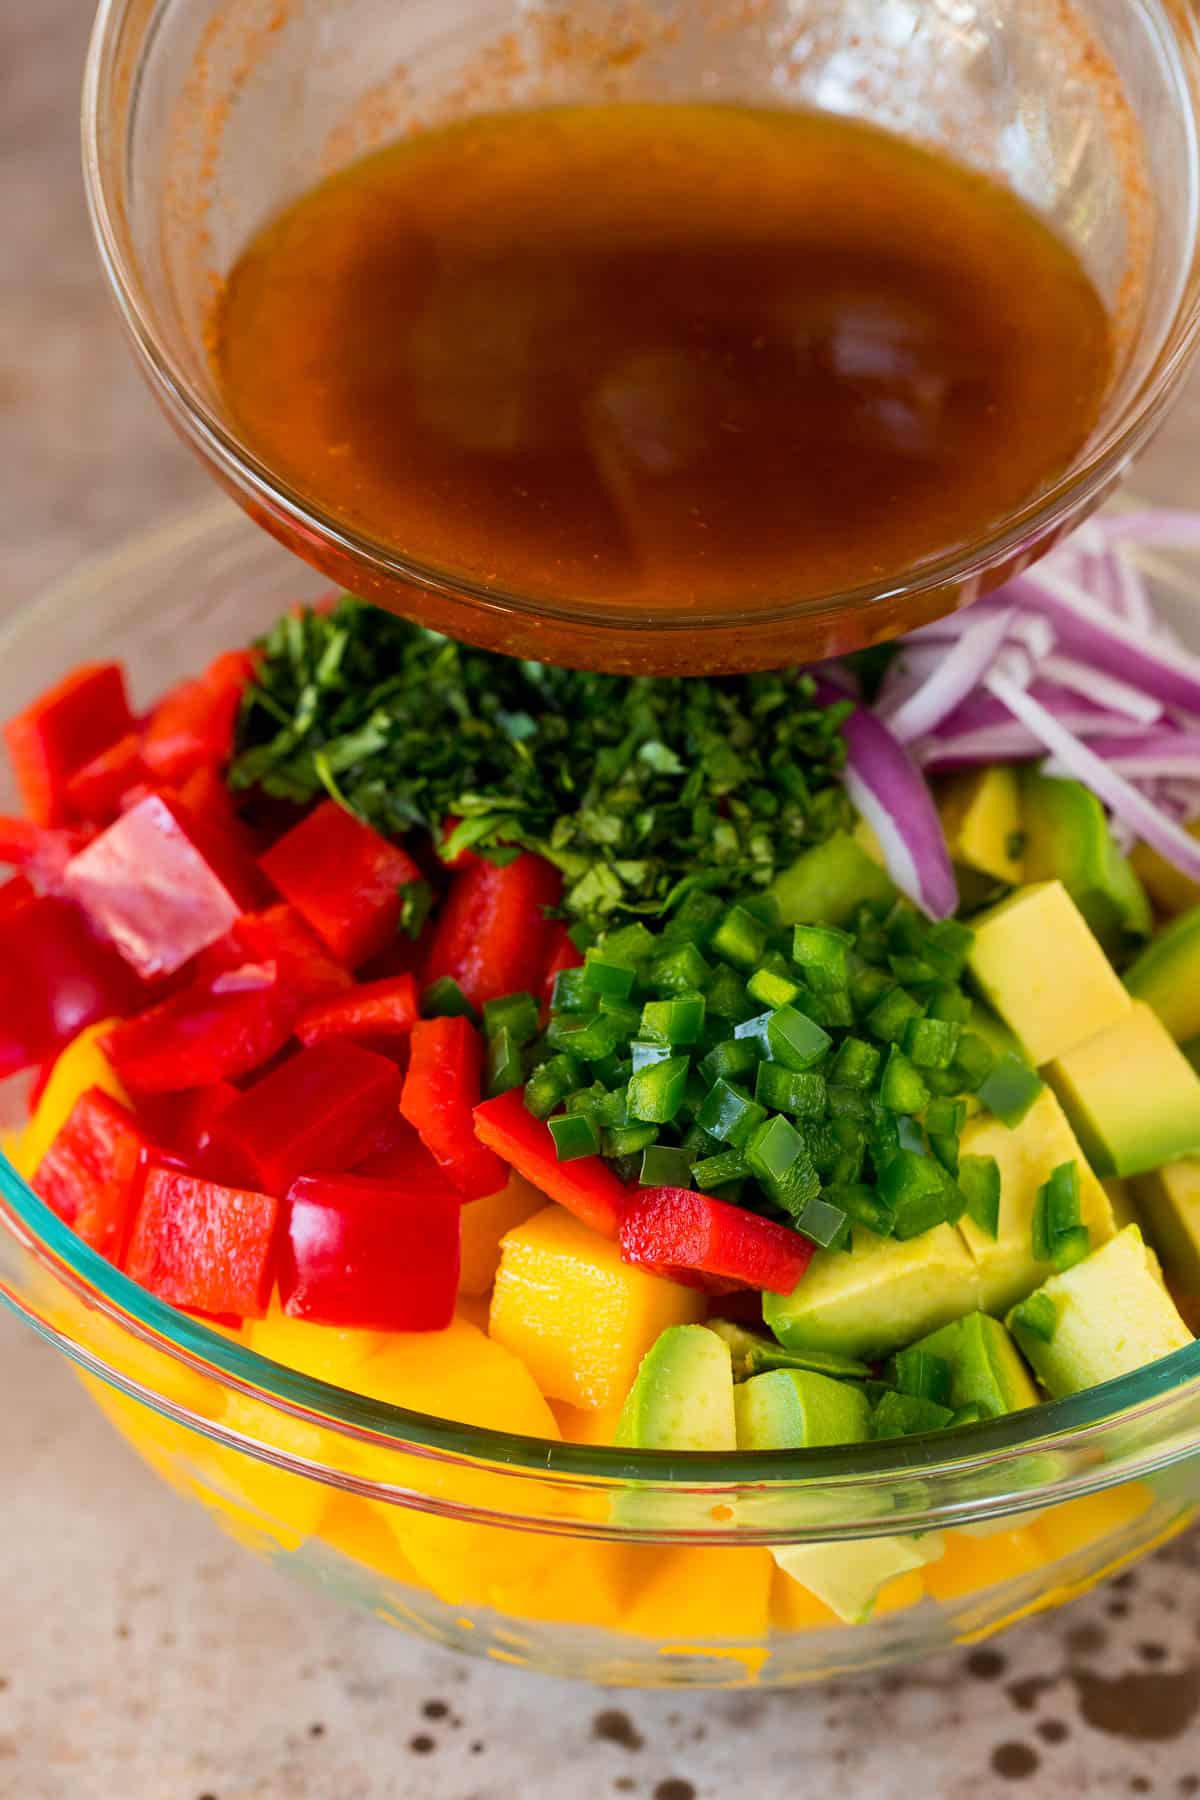 Dressing being poured over mango and vegetables.